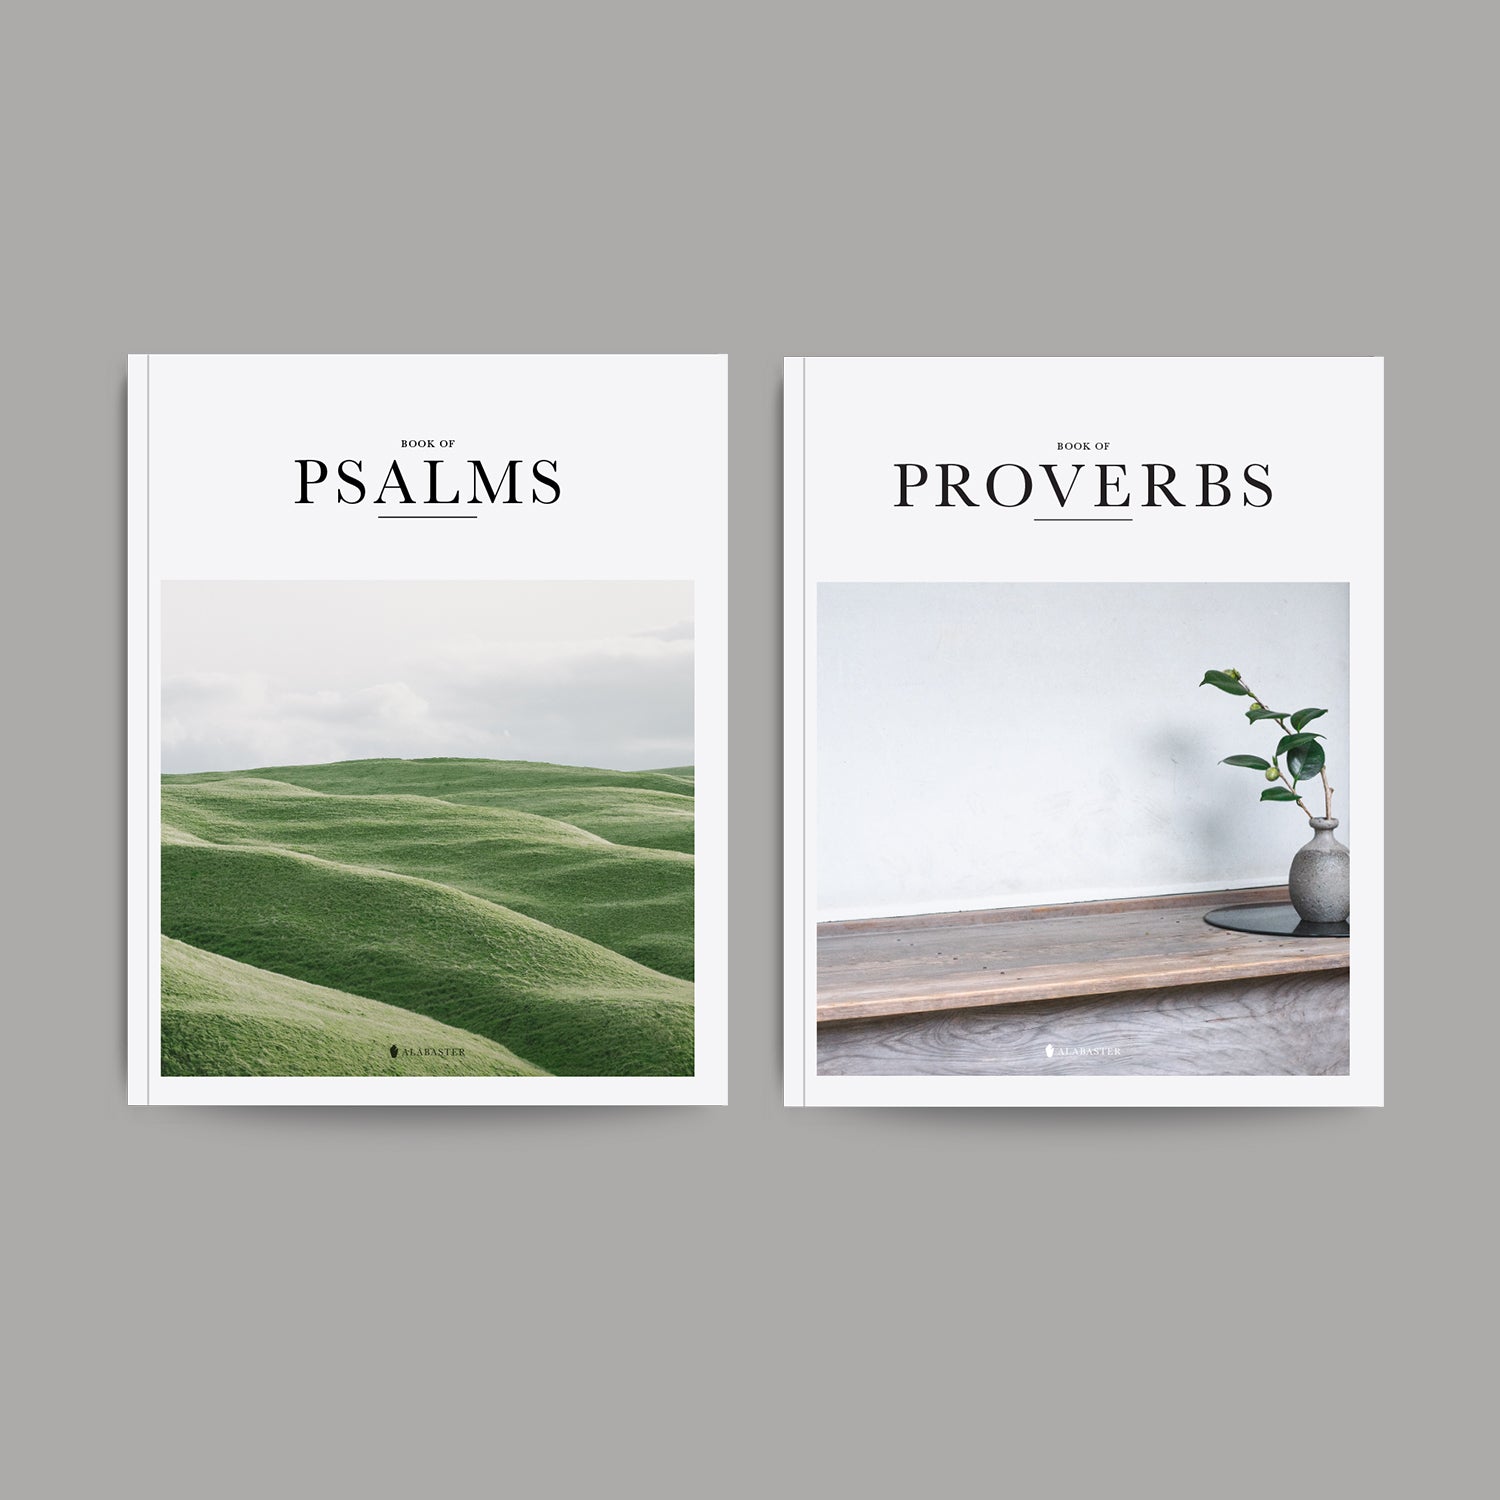 Psalms and Proverbs softcovers